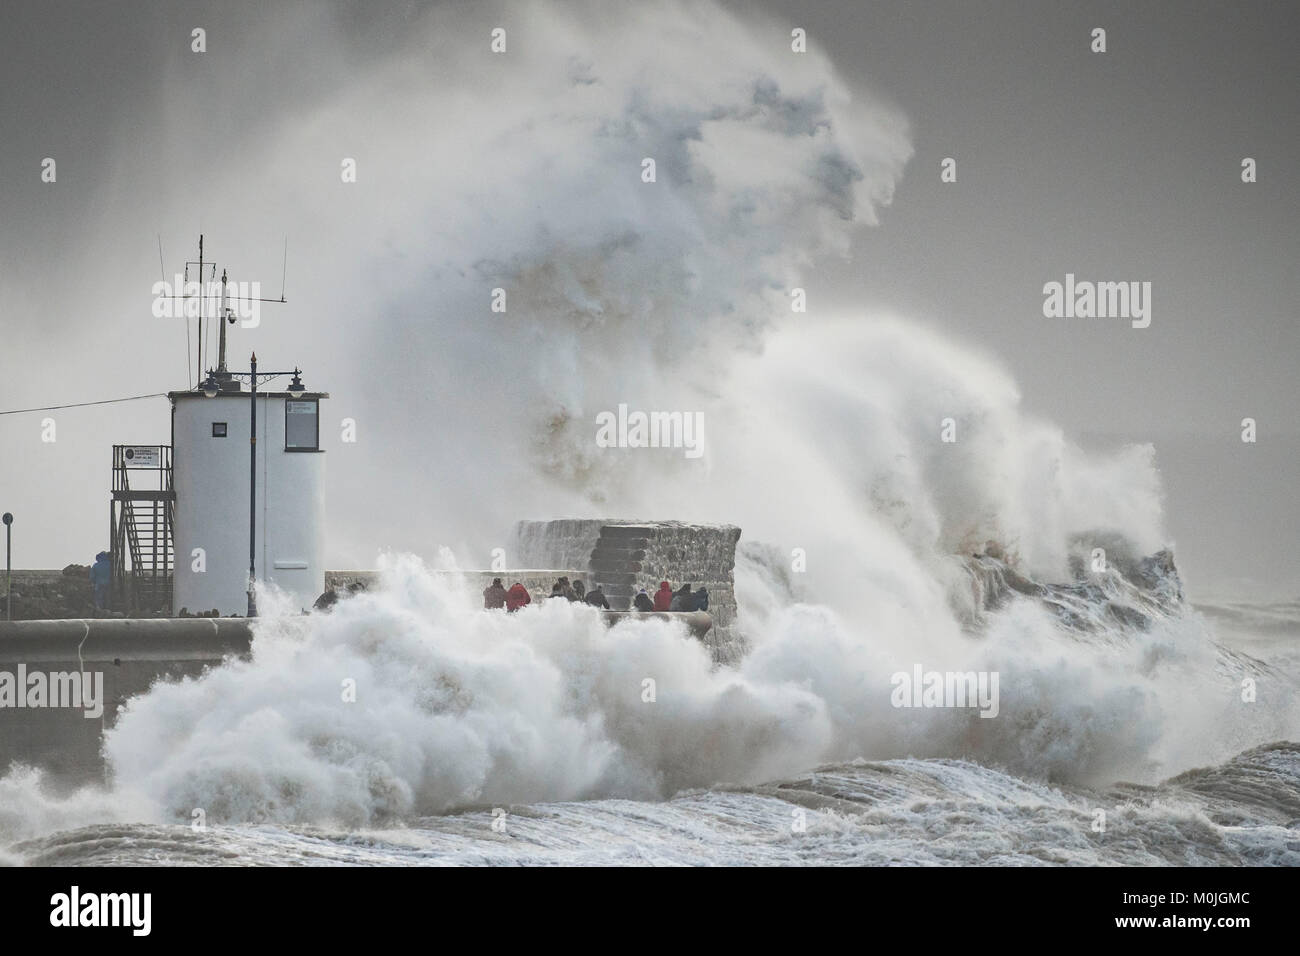 Waves crash against the harbour wall at Porthawl, South Wales, UK during storm Eleanor. The Met Office issued a weather warning for strong winds. Stock Photo